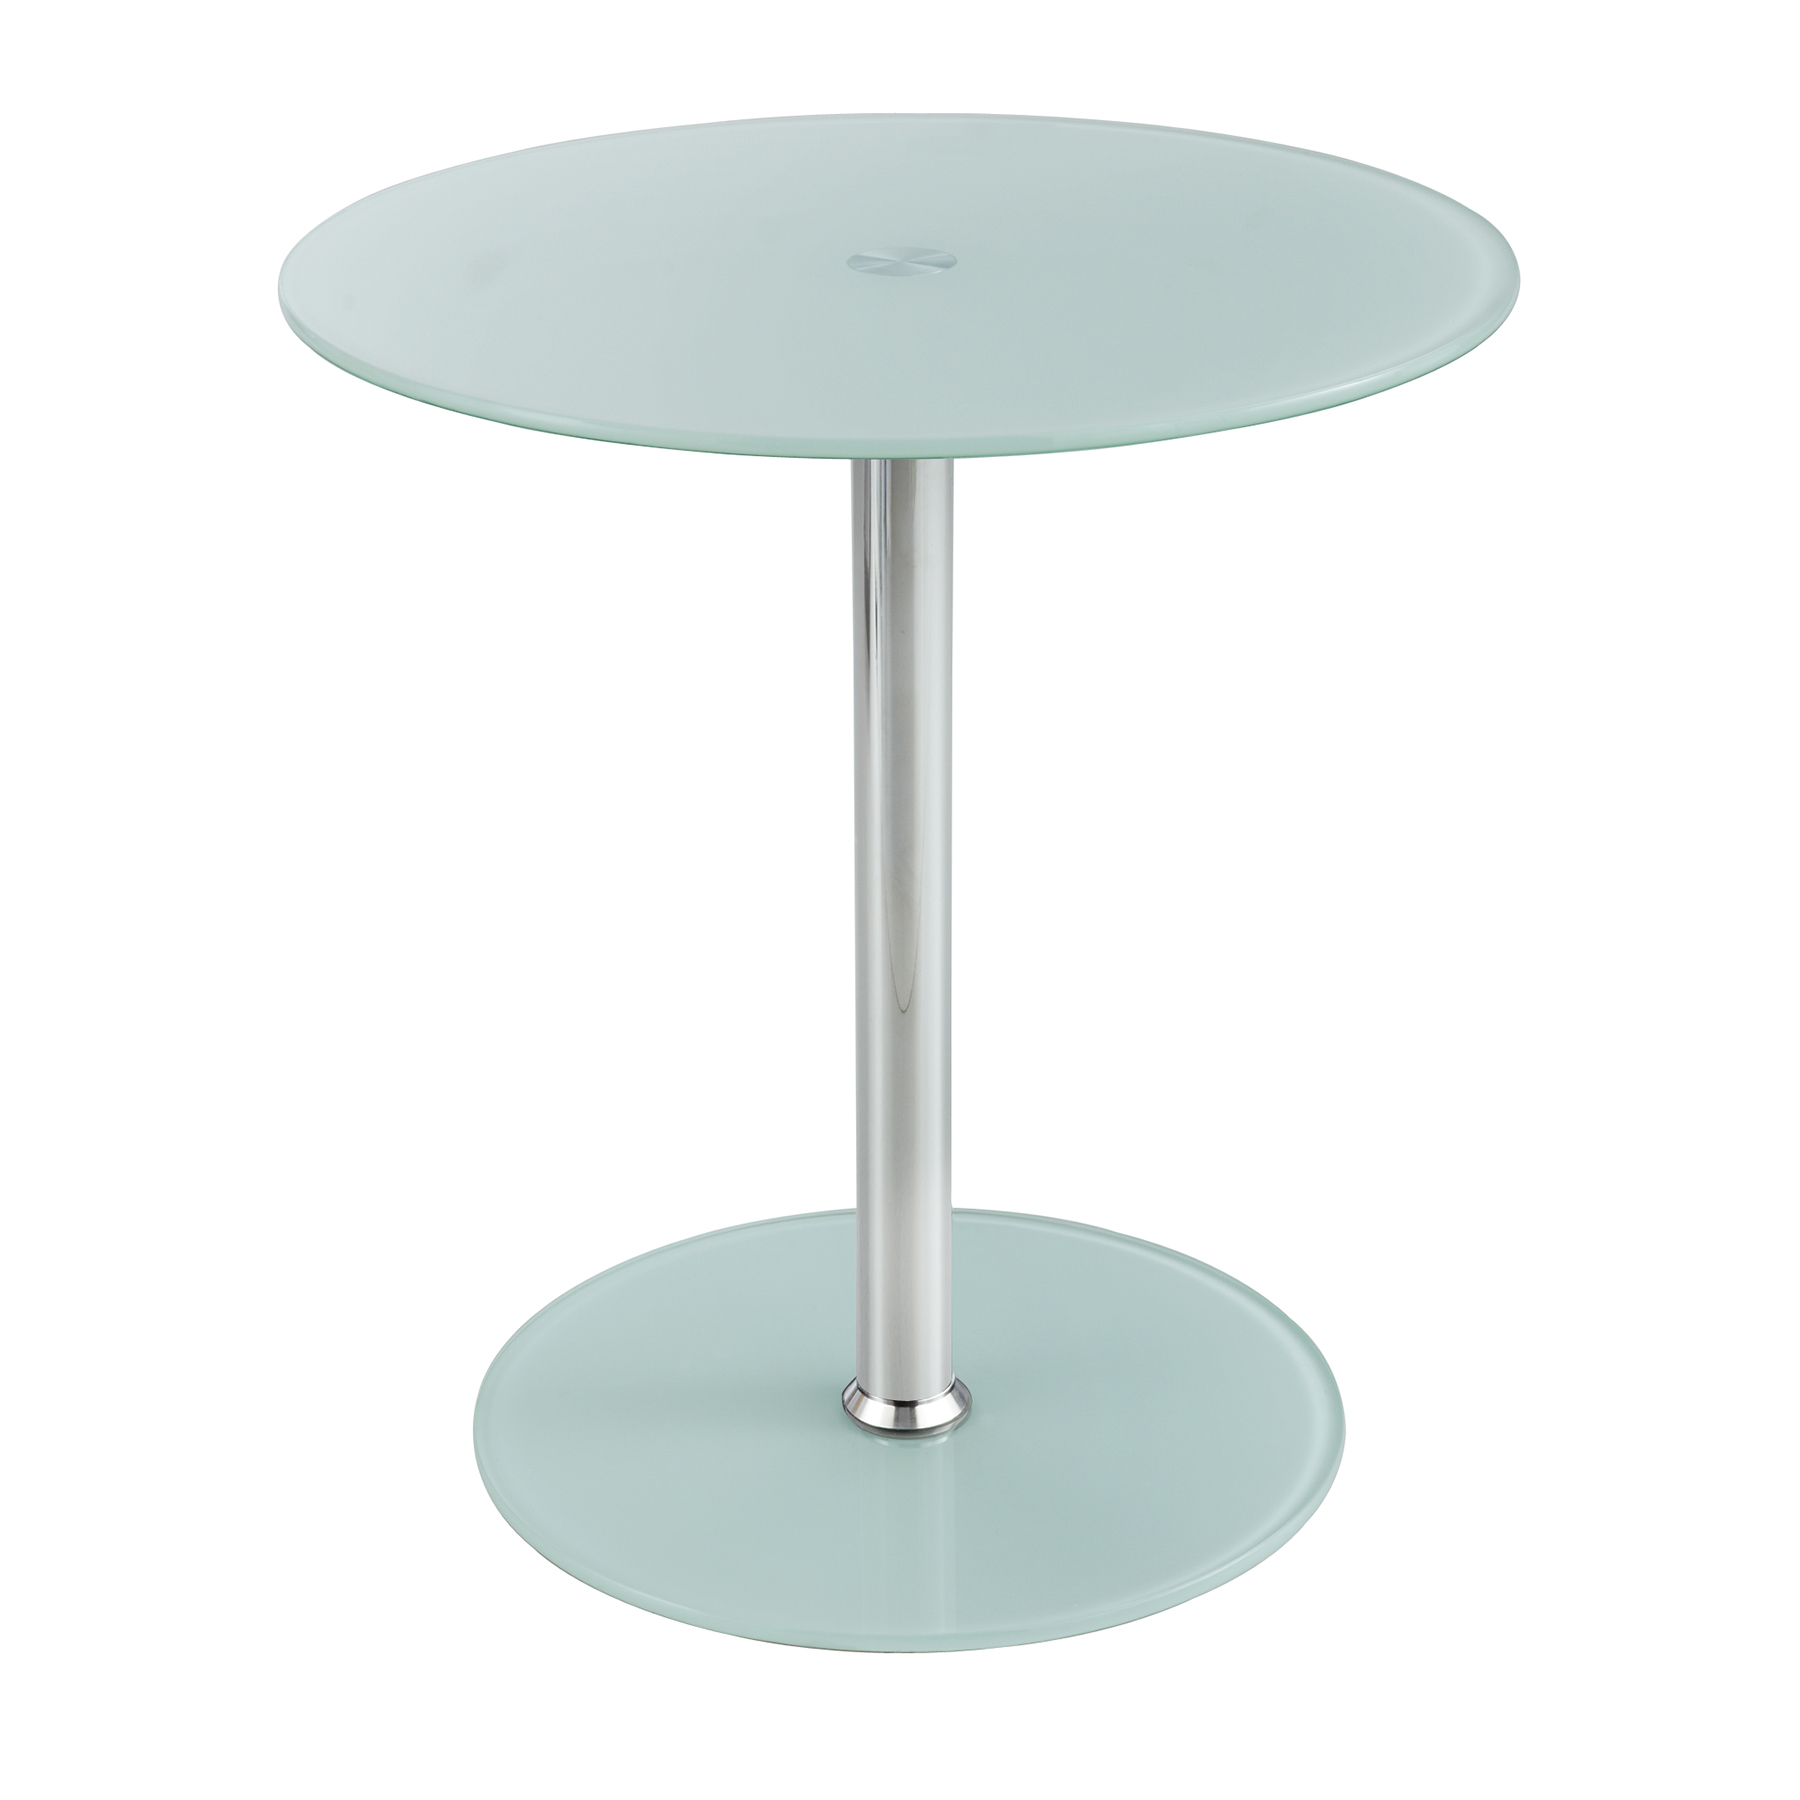 glass accent table safco products green metal round lucite coffee patio furniture toronto clearance vintage bedroom hallway mirror cabinet wooden folding side hobby lobby craft